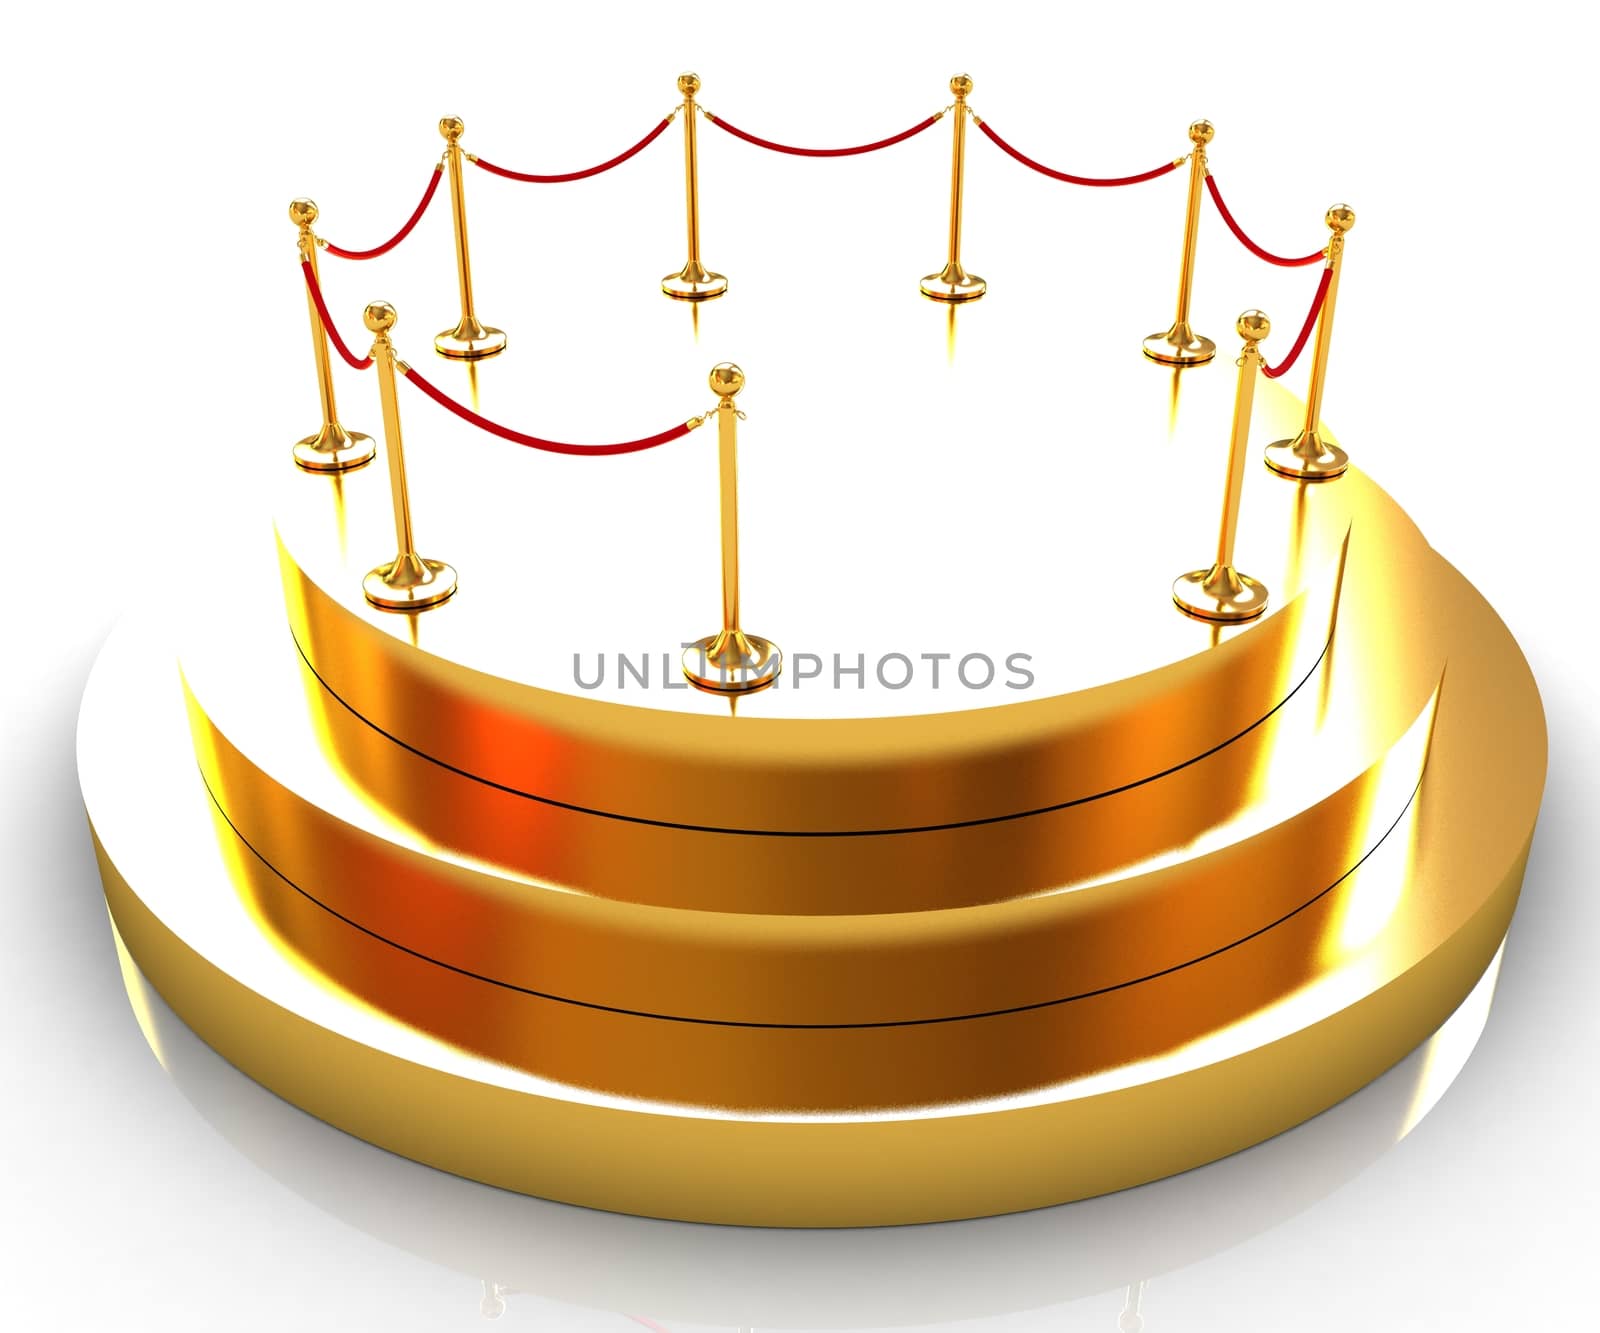 Gold podium 3d on a white background